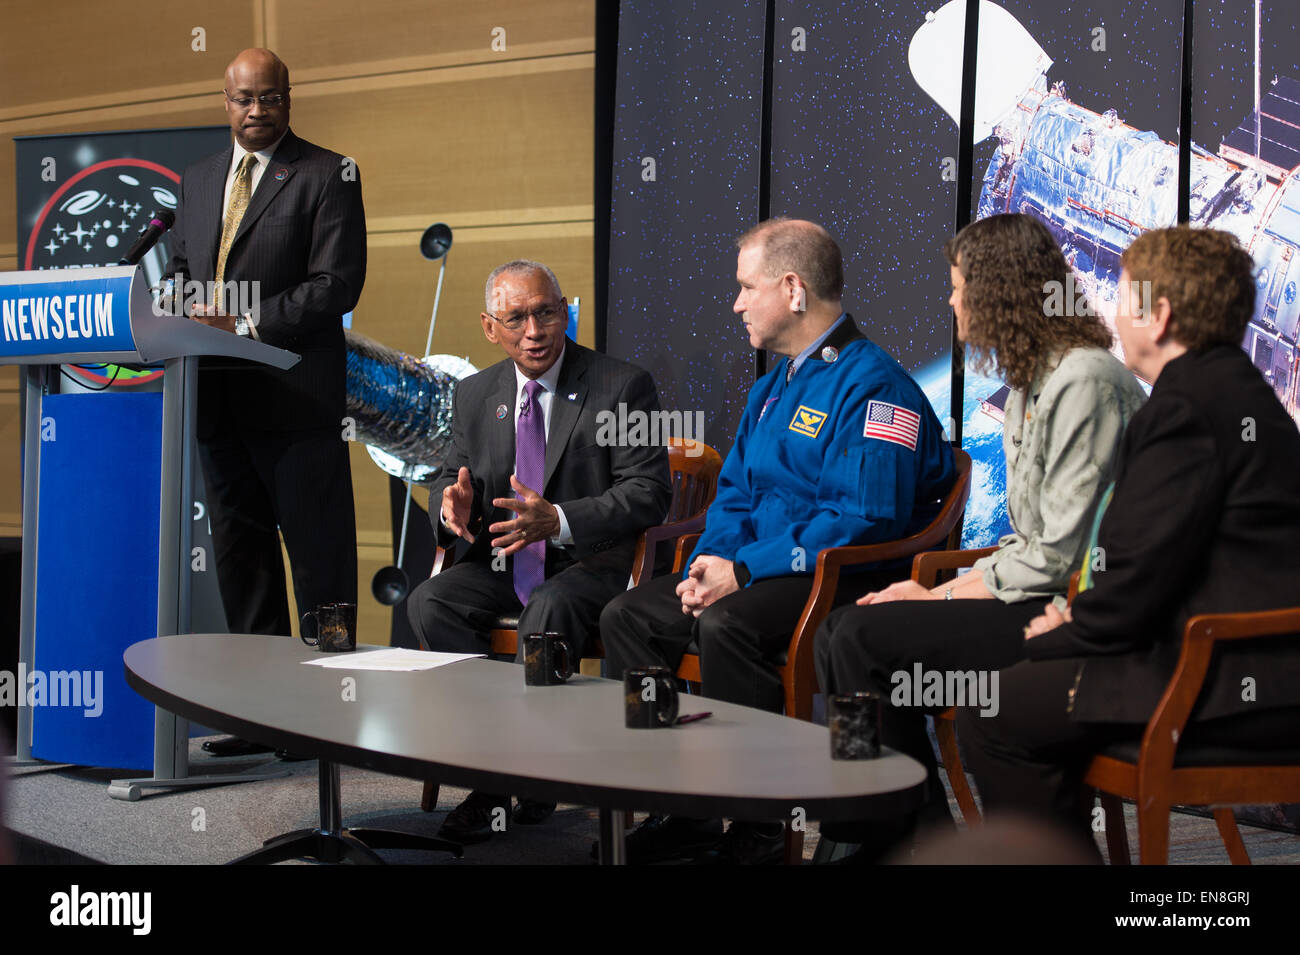 NASA Administrator Charles Bolden speaks at the Hubble 25th Anniversary official image debut event on Thursday, April 23, 2015 at the Newseum in Washington, DC. The official image from Hubble's near-infrared Wide Field Camera 3 is of a two million year old cluster of about 3,000 stars called Westerlund 2, named after the astronomer who discovered it in the 1960s. Westerlund 2 is located in the constellation Carina about 20,000 light-years away from Earth. Stock Photo